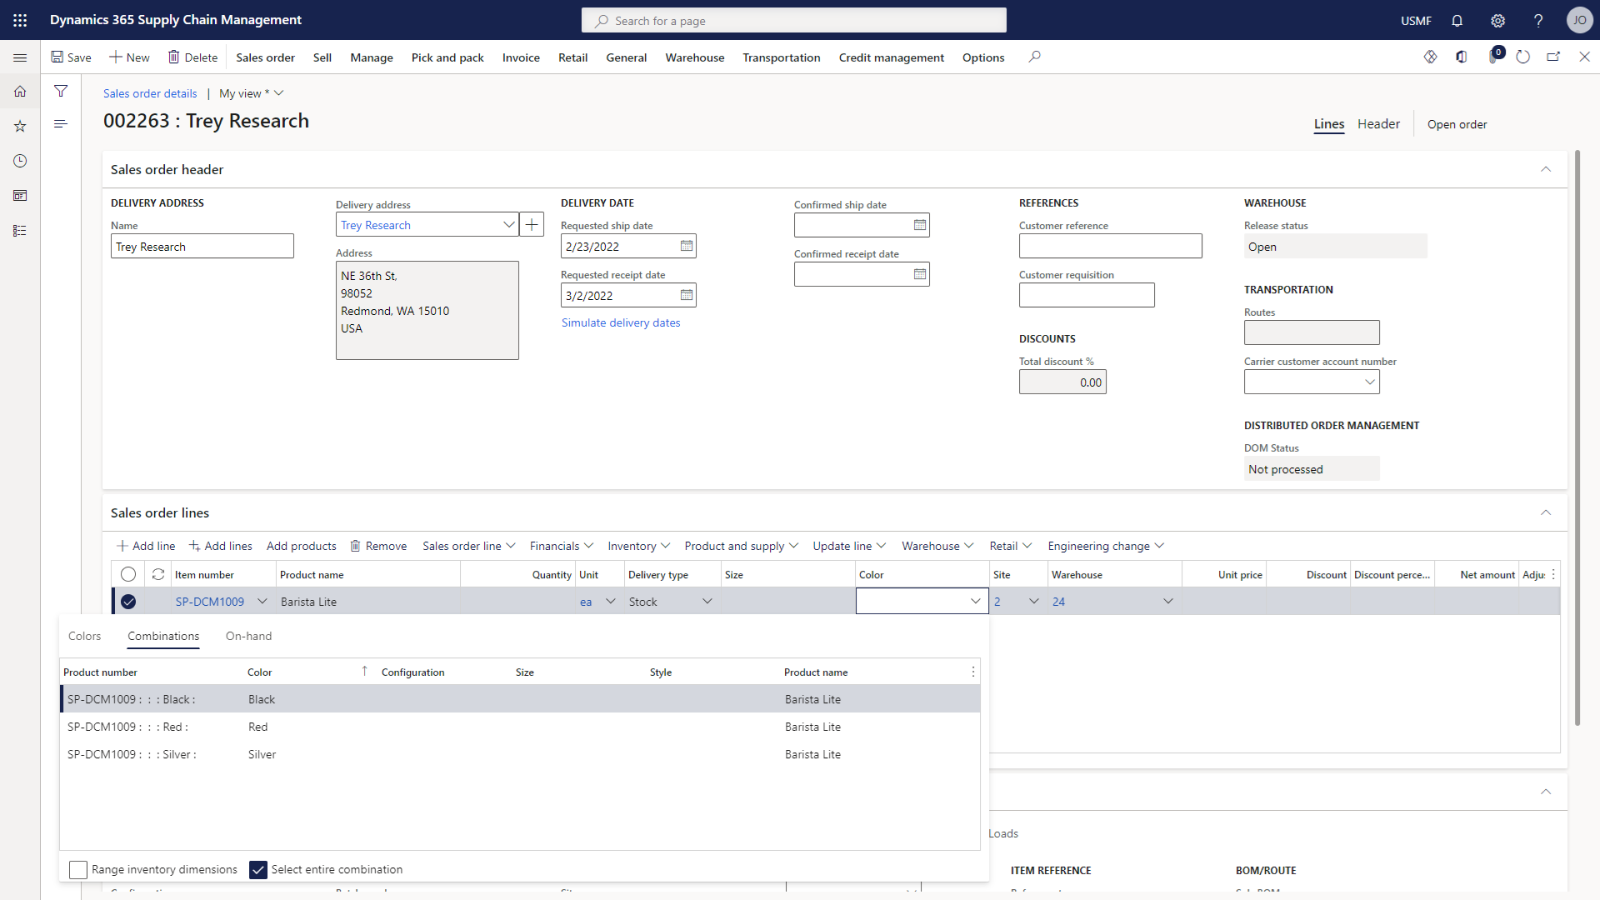 Dynamics 365 Supply Chain Management 35df7e75-0625-48c2-b584-ee93cdcfe238.png